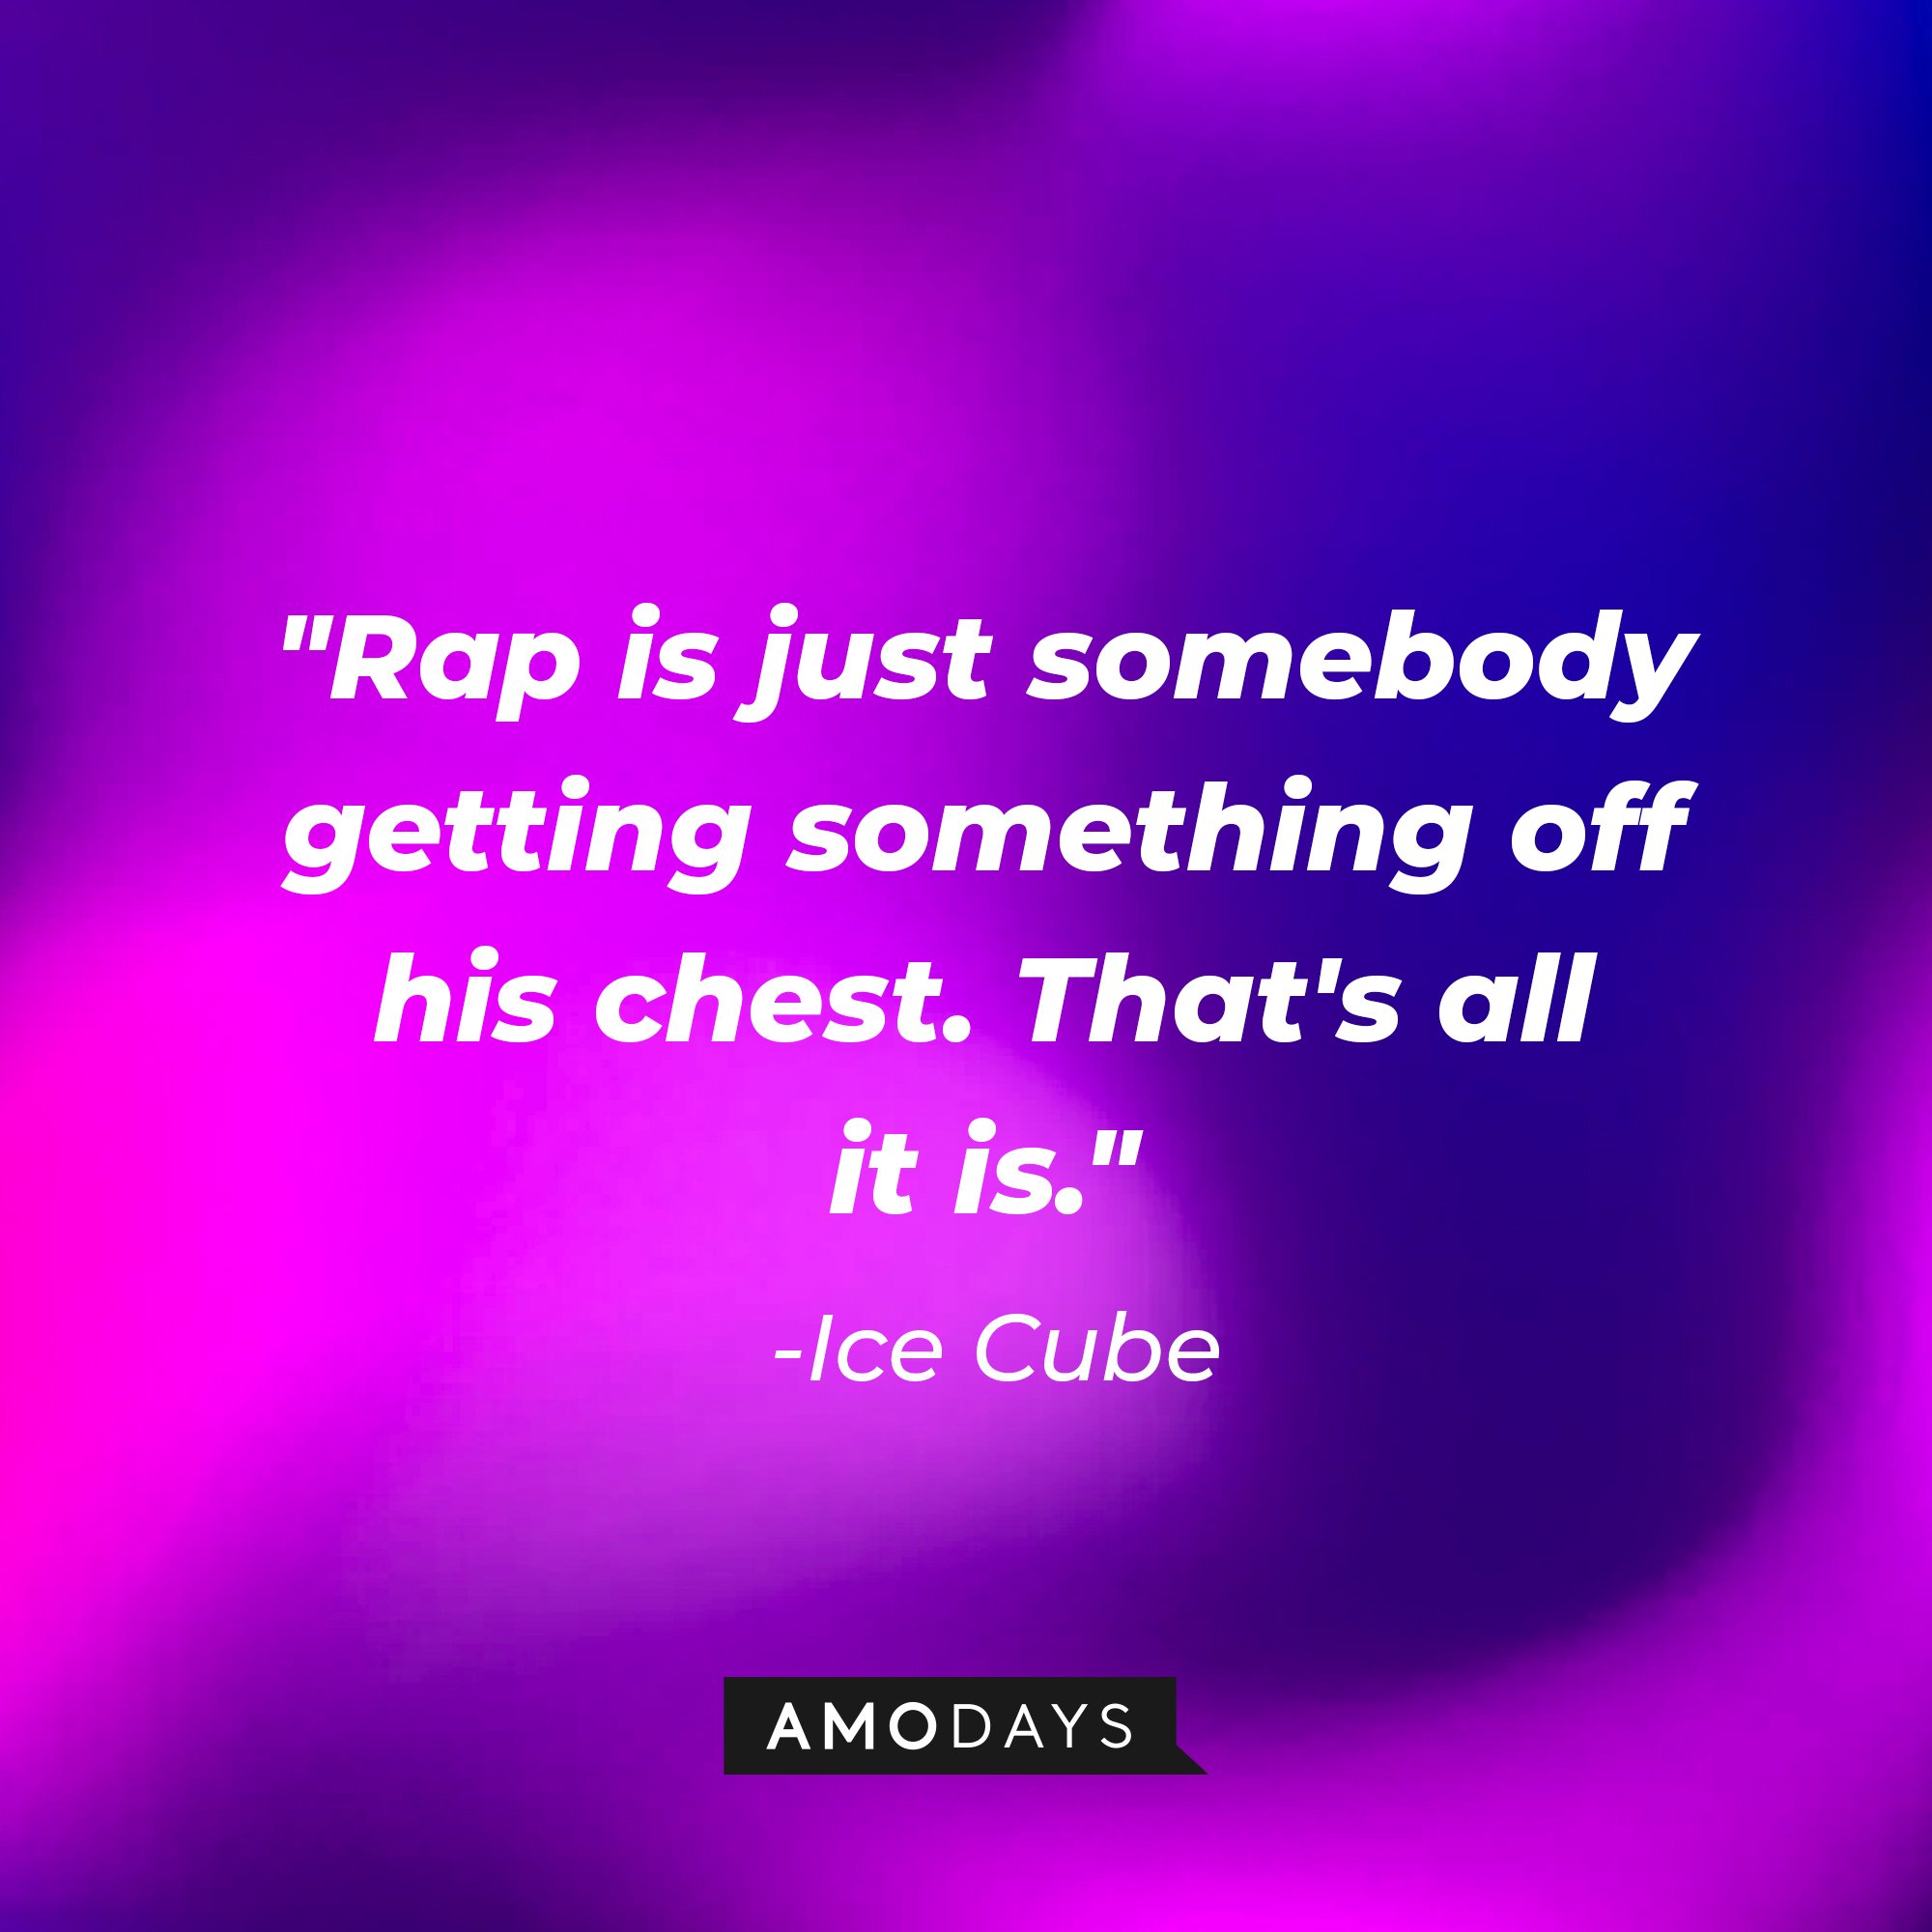 Ice Cube's quote: "Rap is just somebody getting something off his chest. That's all it is." — Ice Cube | Image: AmoDays